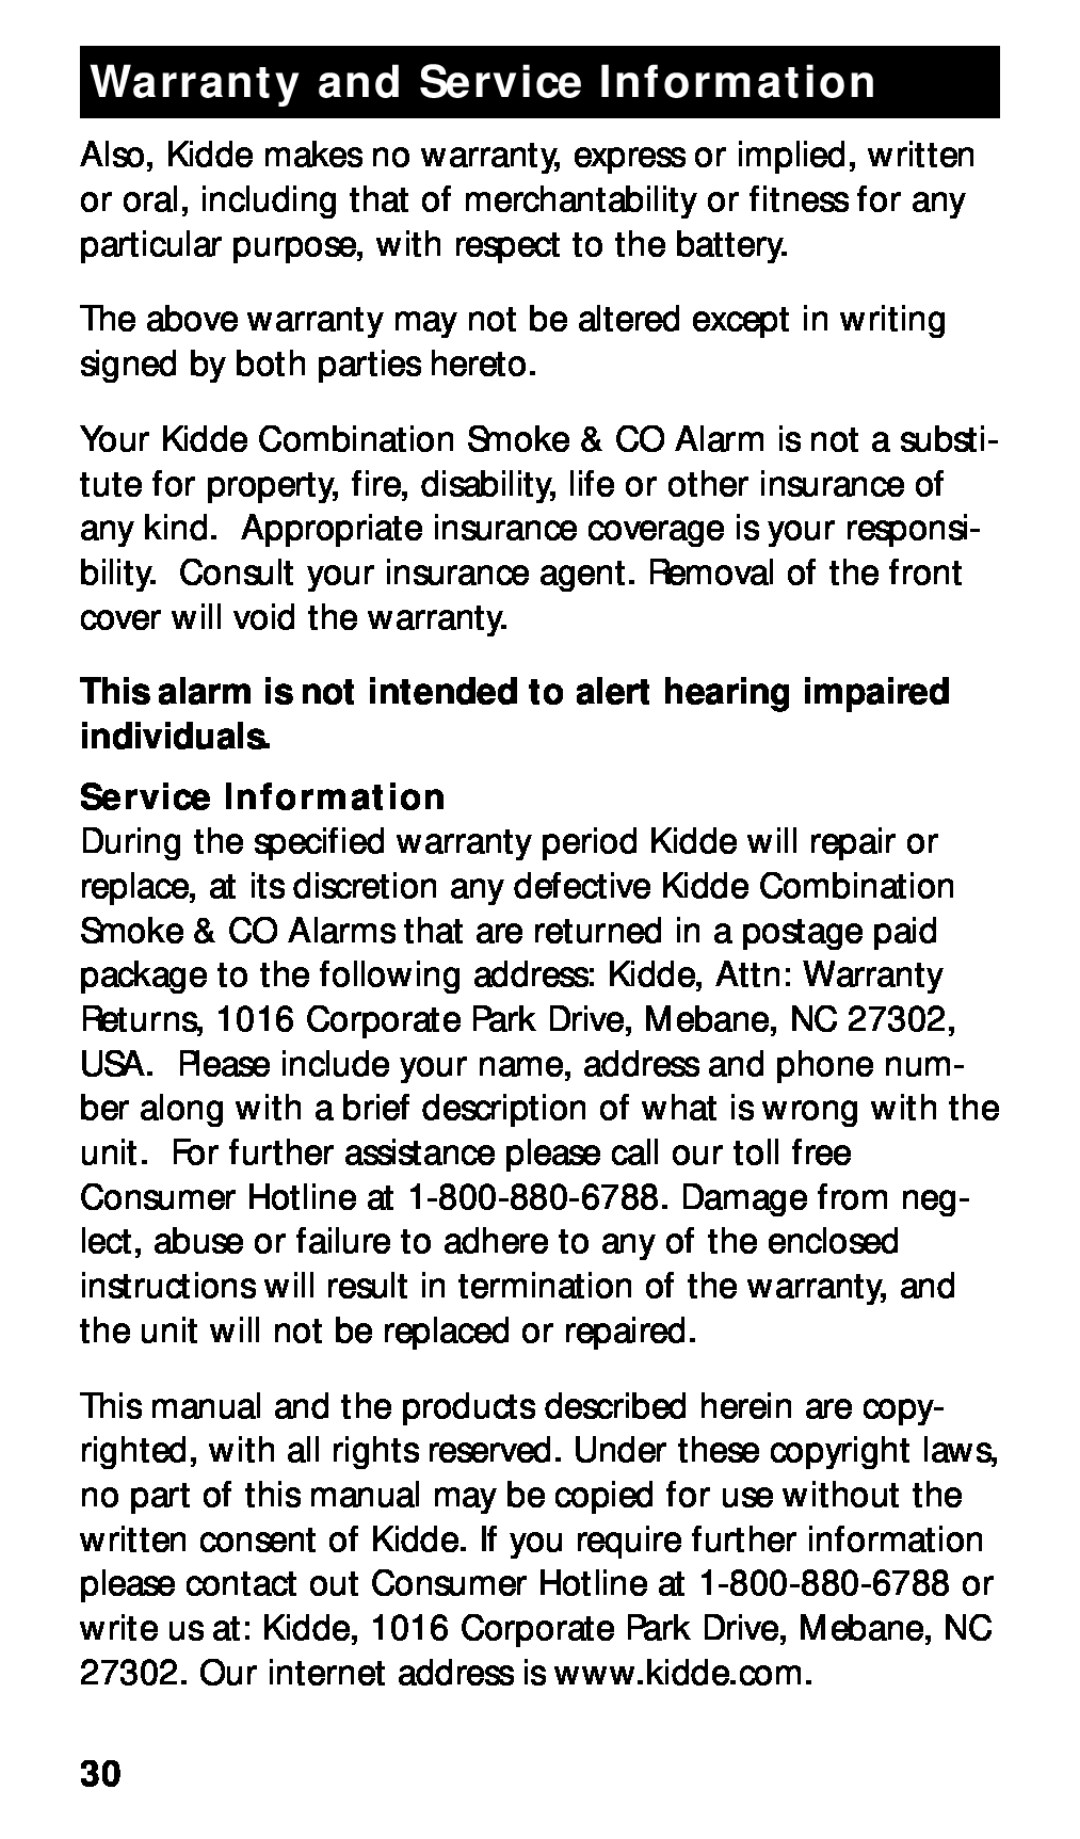 Kidde KN-COSMXTR-B manual This alarm is not intended to alert hearing impaired individuals, Service Information 